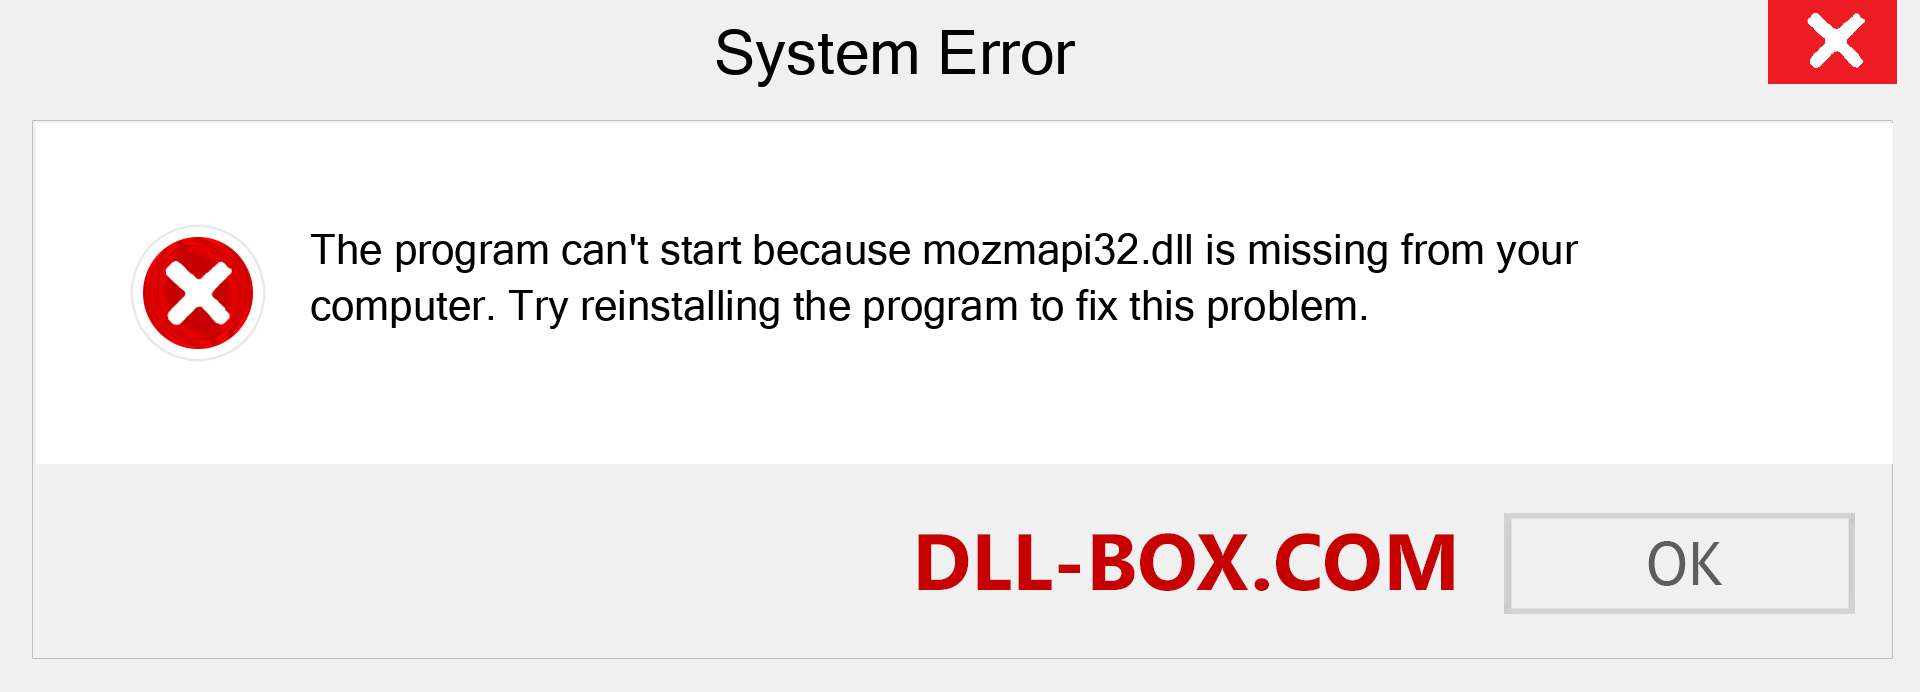  mozmapi32.dll file is missing?. Download for Windows 7, 8, 10 - Fix  mozmapi32 dll Missing Error on Windows, photos, images